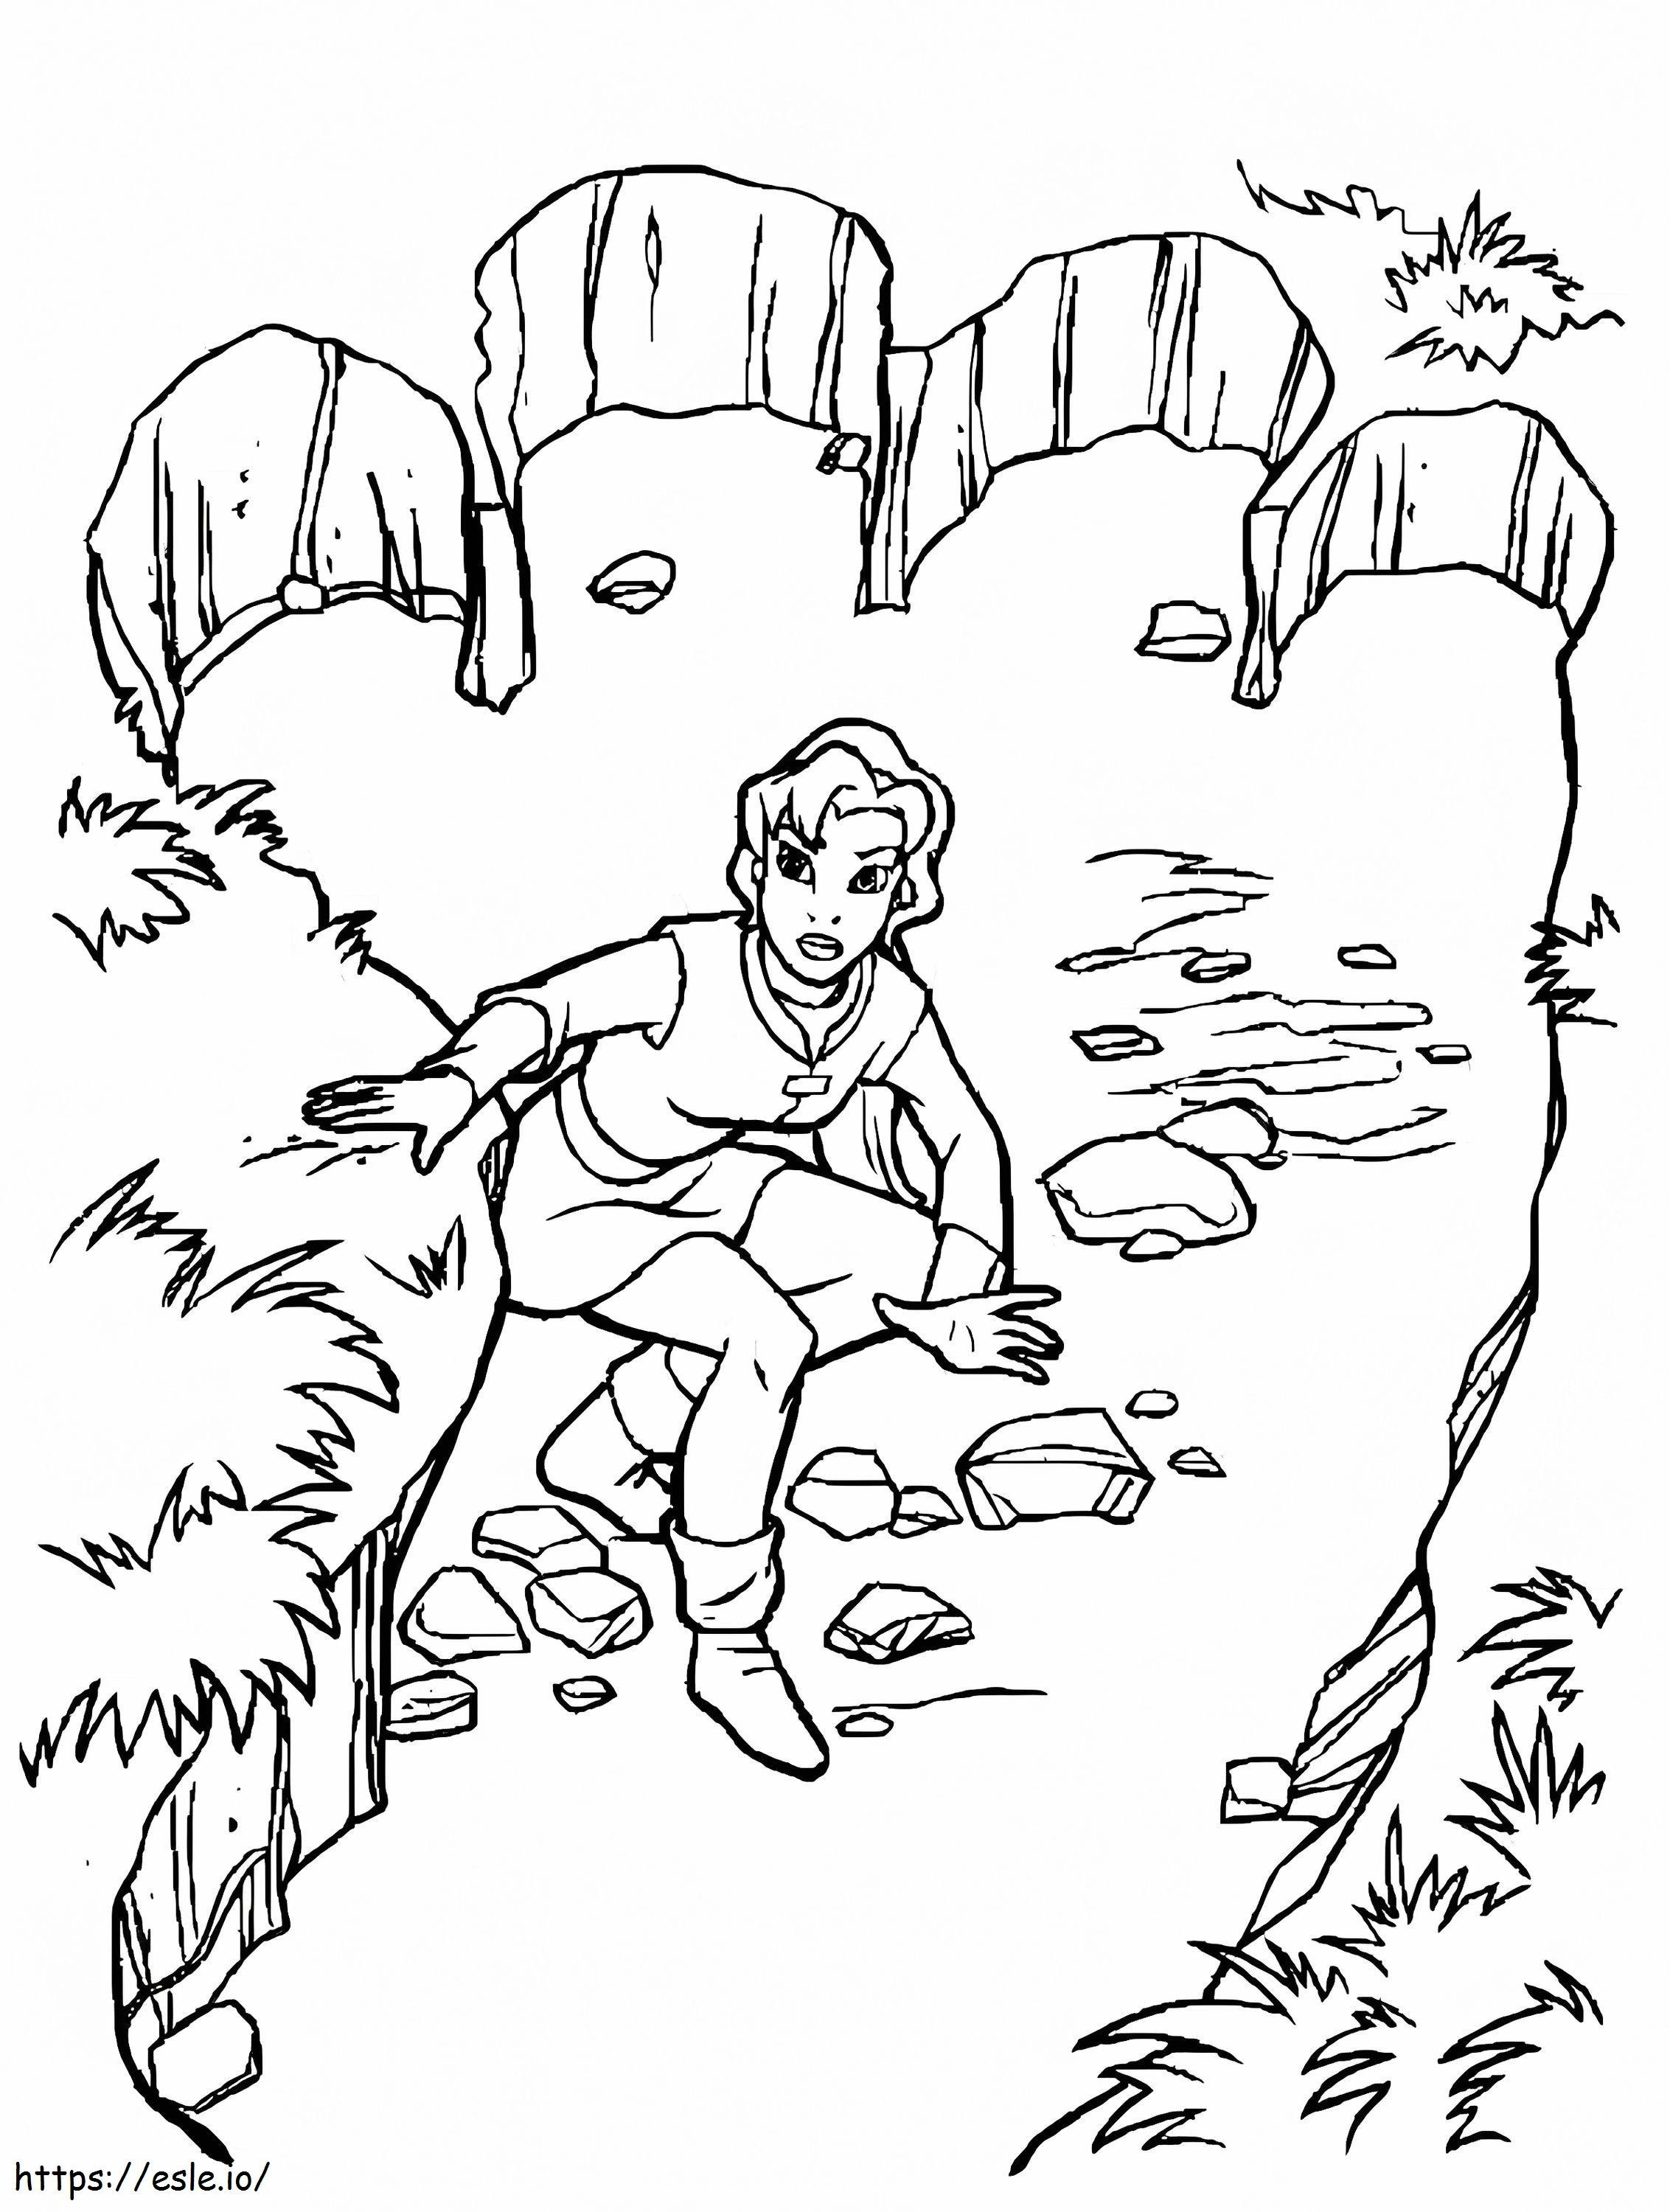 Quest For Camelot 8 coloring page